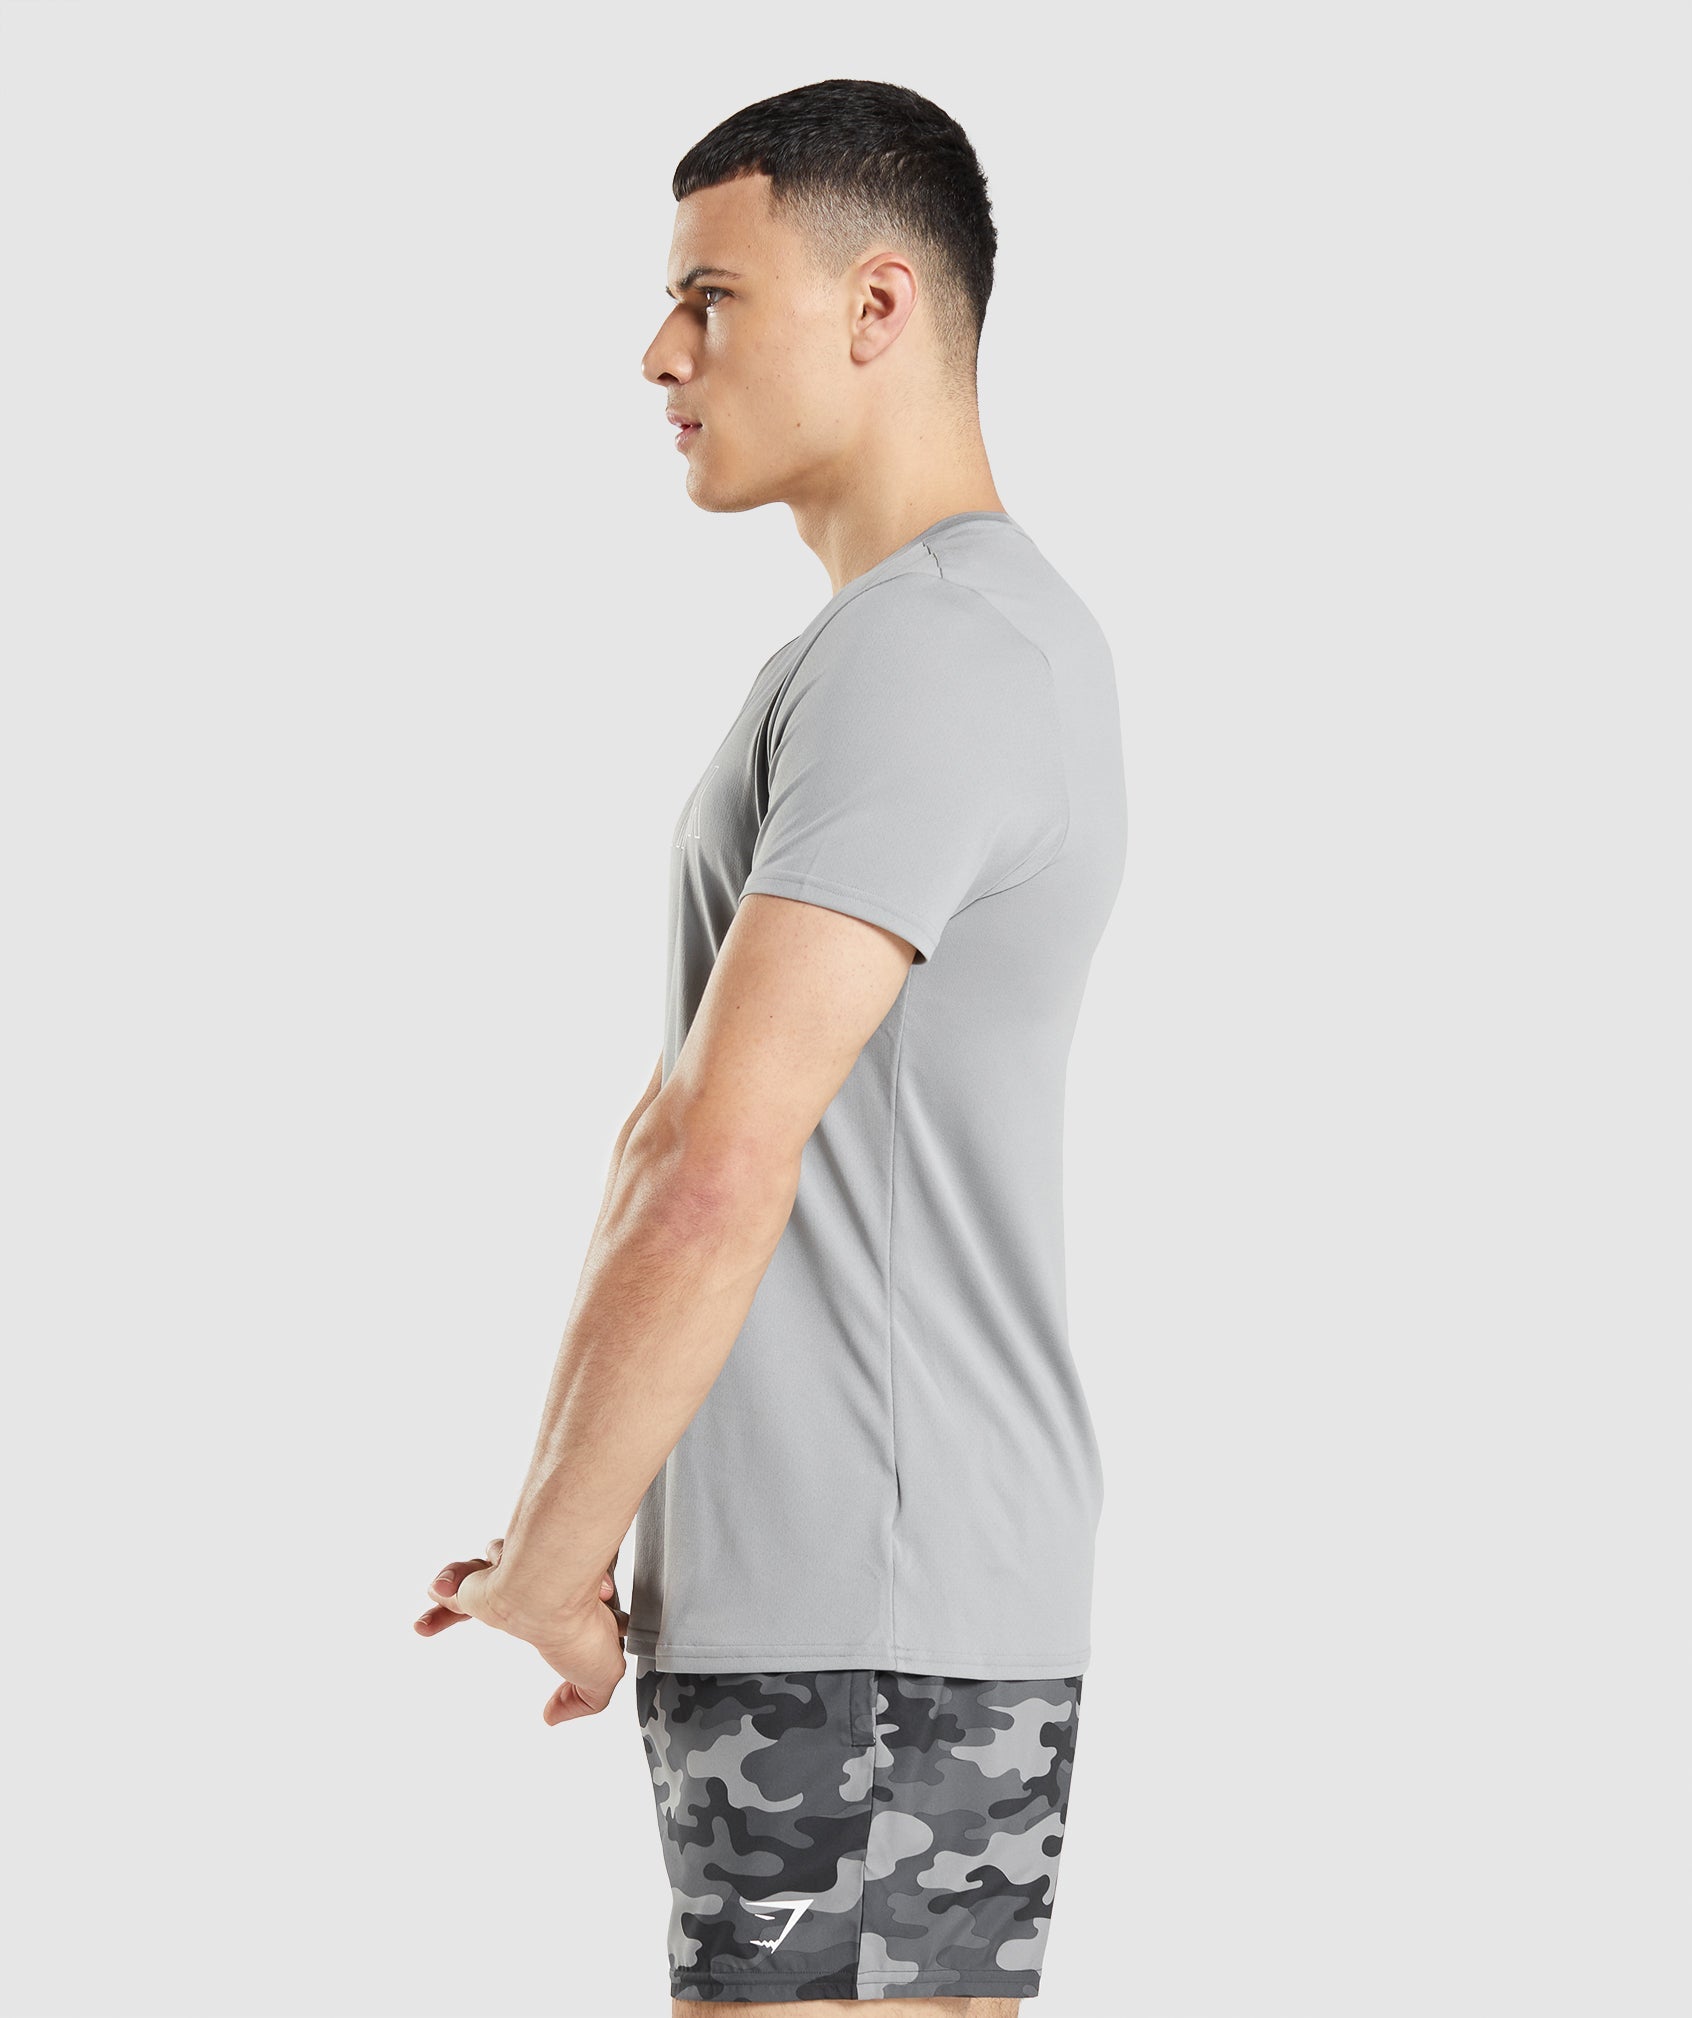 Arrival Graphic T-Shirt in Smokey Grey - view 3